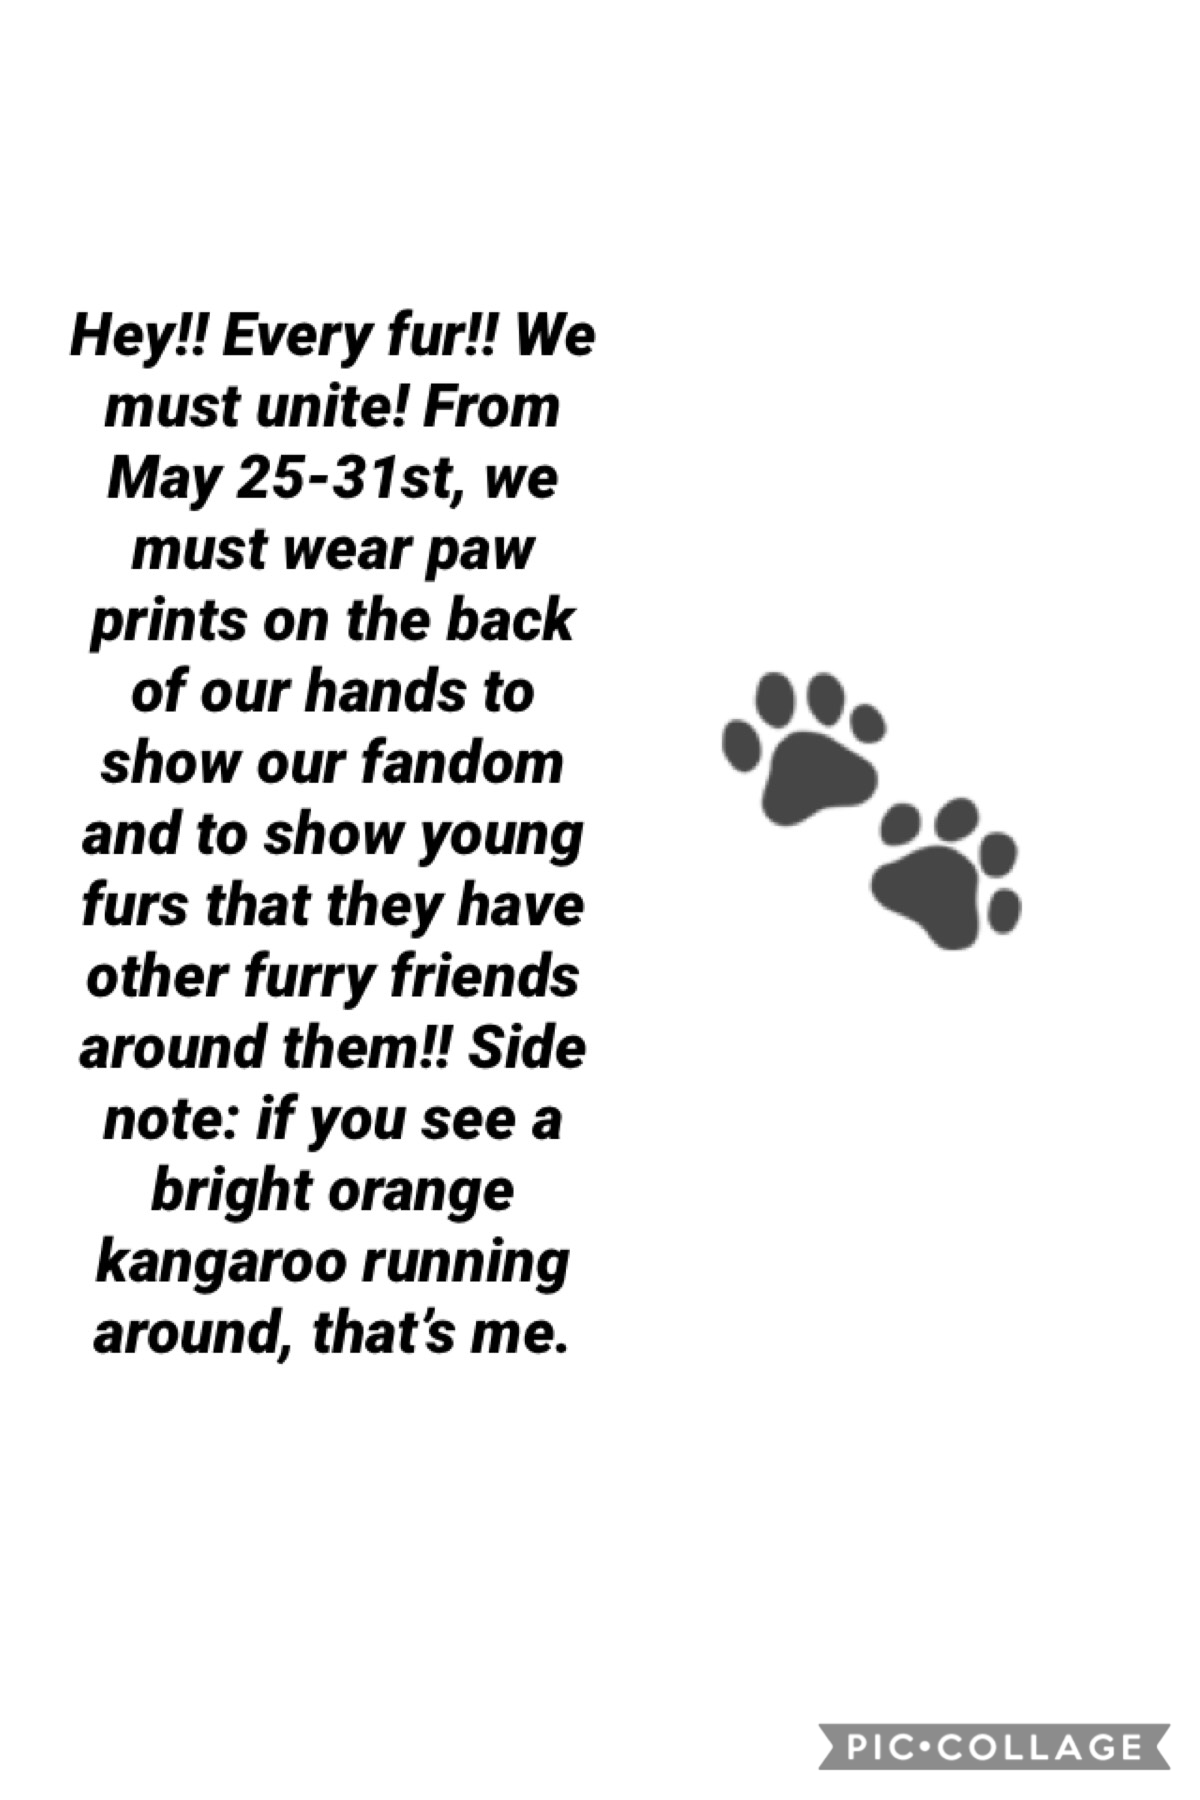 Join me in this noble cause to show young furs alone in the fandom that they have friends around them!! Also, tell people about this please. It be a big help. Thx for reading!!